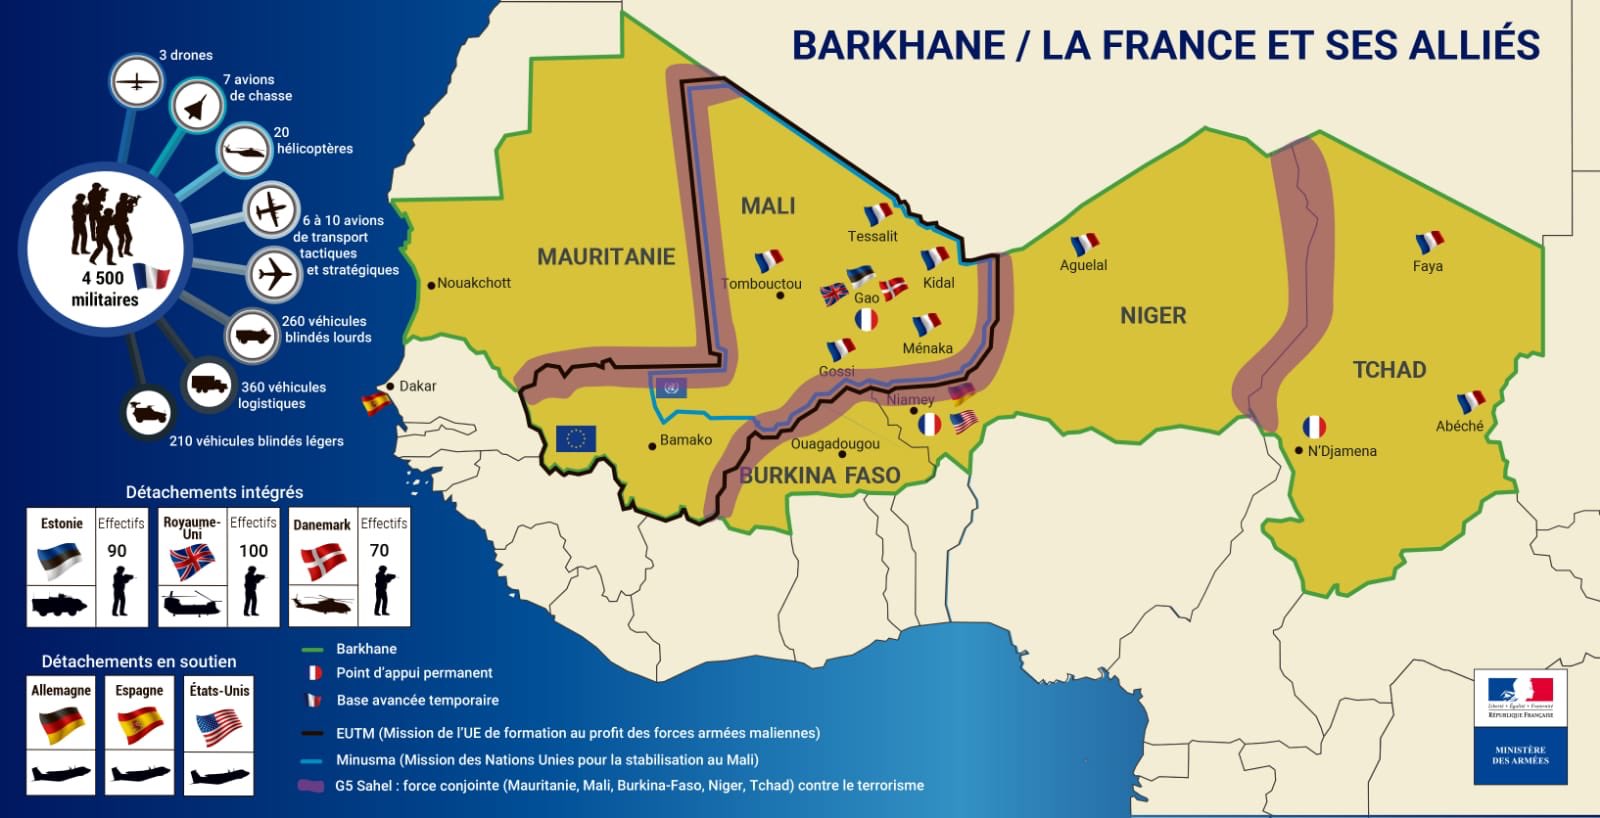 A French Ministry of Armed Forces map shows the disposition of French and allied forces in the region, as well the operating areas of the G5 Sahel Joint Force along the five members' borders. (Ministère des Armées)